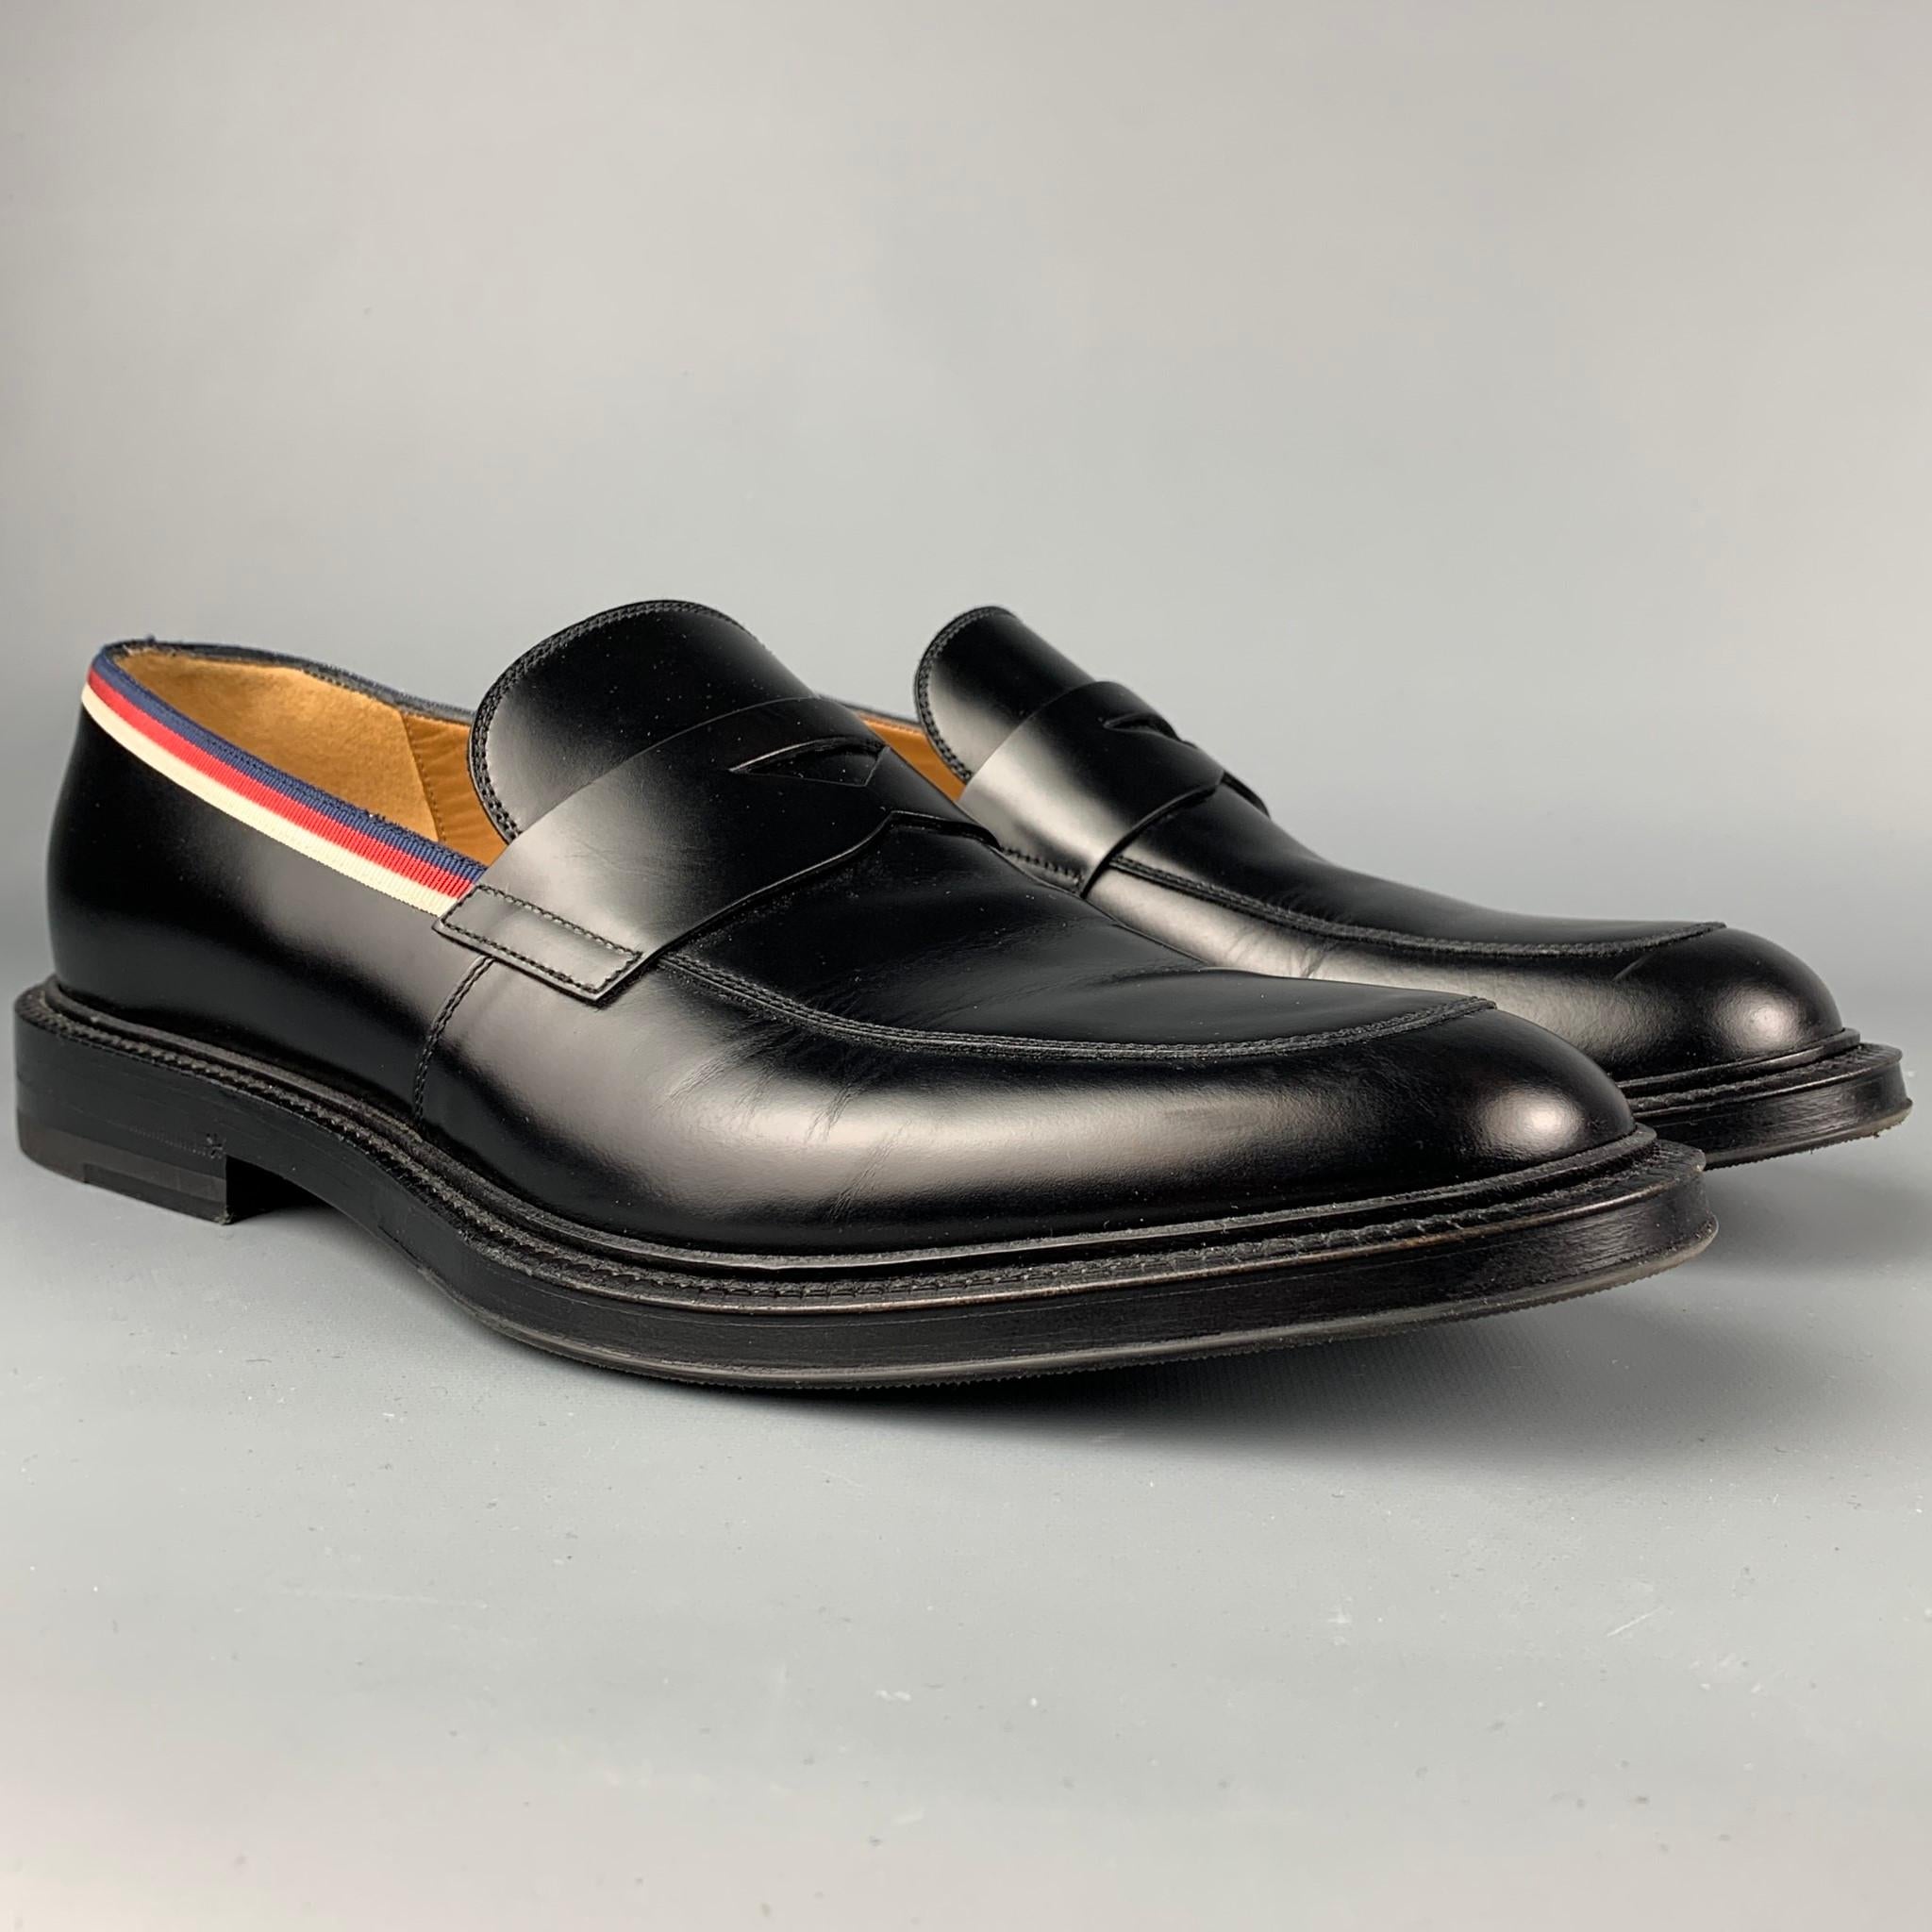 GUCCI loafers comes in a black leather featuring a round toe, ribbon trim, and a penny strap. Made in Italy. 

Very Good Pre-Owned Condition.
Marked: 473475 8.5 040
Original Retail Price: $850.00

Outsole: 12.25 in. x 4.5 in. 